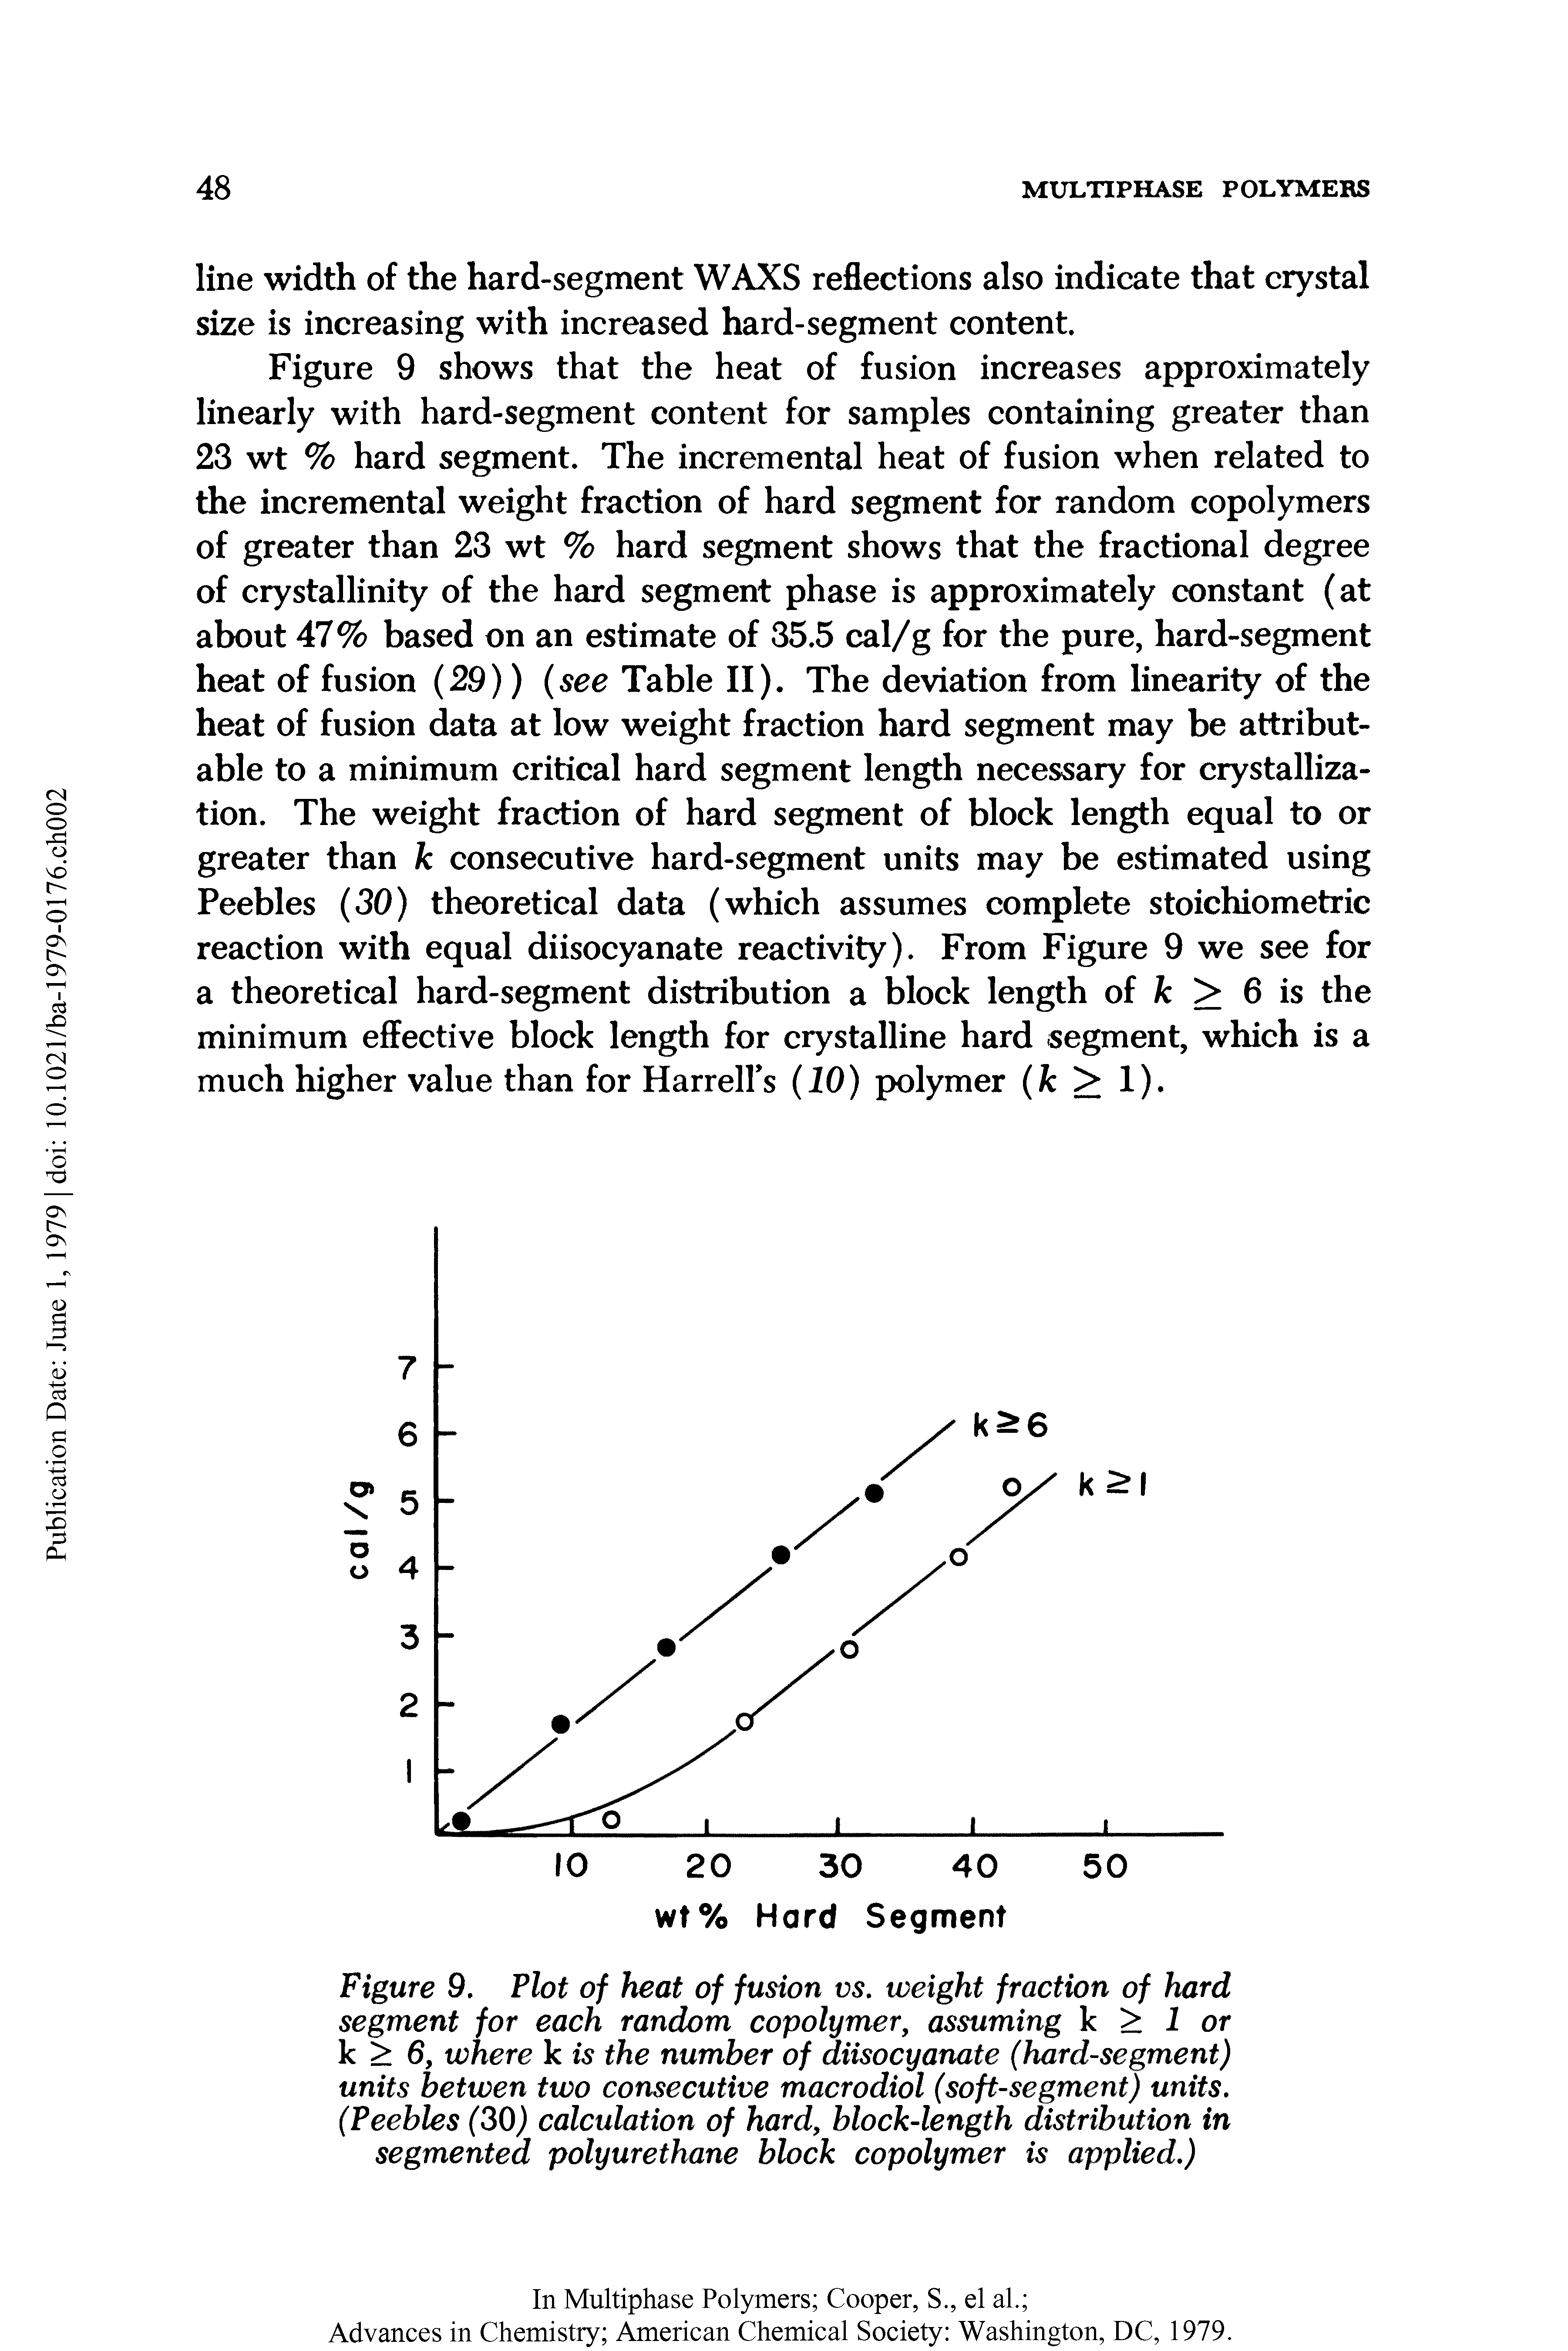 Figure 9. Plot of heat of fusion vs. weight fraction of hard segment for each random copolymer, assuming k > 1 or k > 6, where k is the number of diisocyanate (hard-segment) units betwen two consecutive macrodiol (soft-segment) units. (Peebles (30) calculation of hard, block-length distribution in segmented polyurethane block copolymer is applied.)...